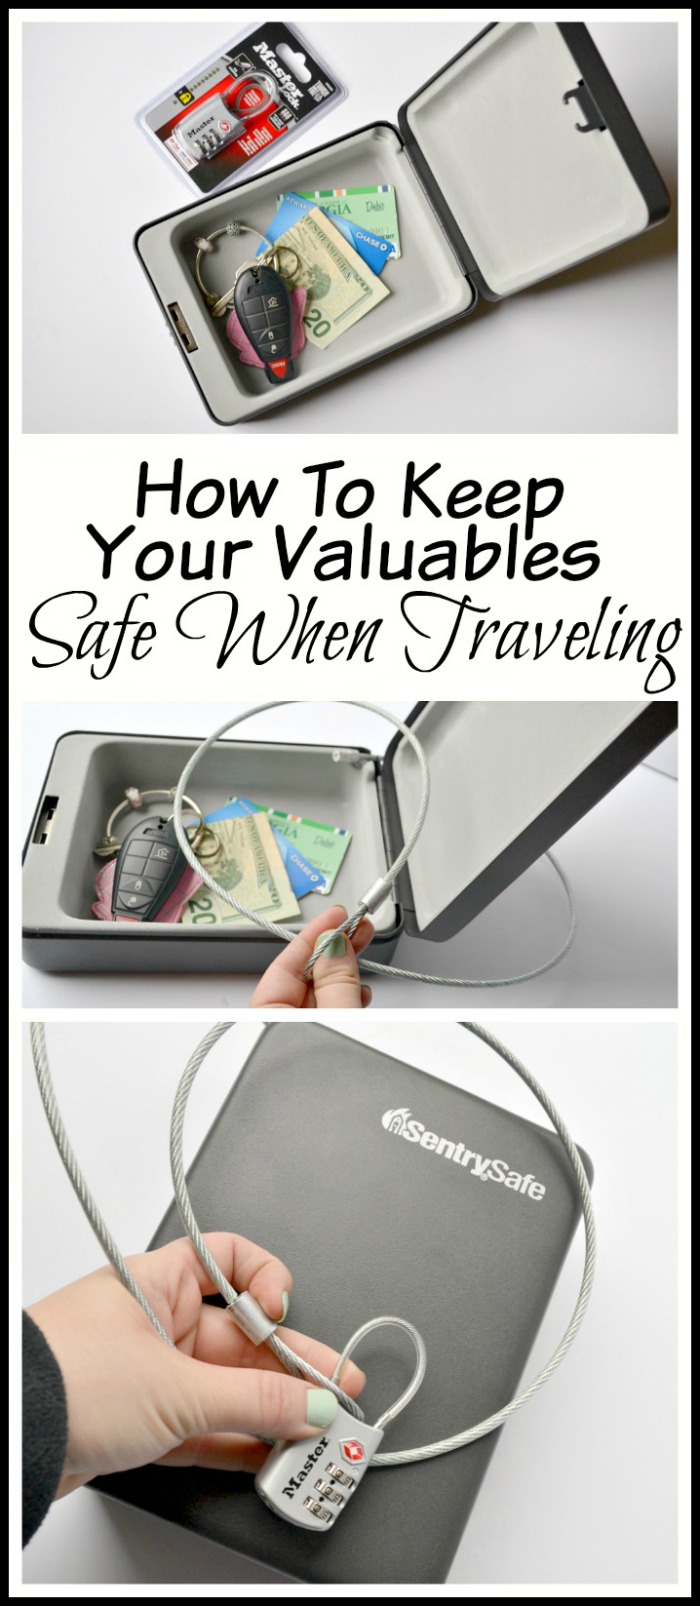 How To Keep Your Valuables Safe When Traveling